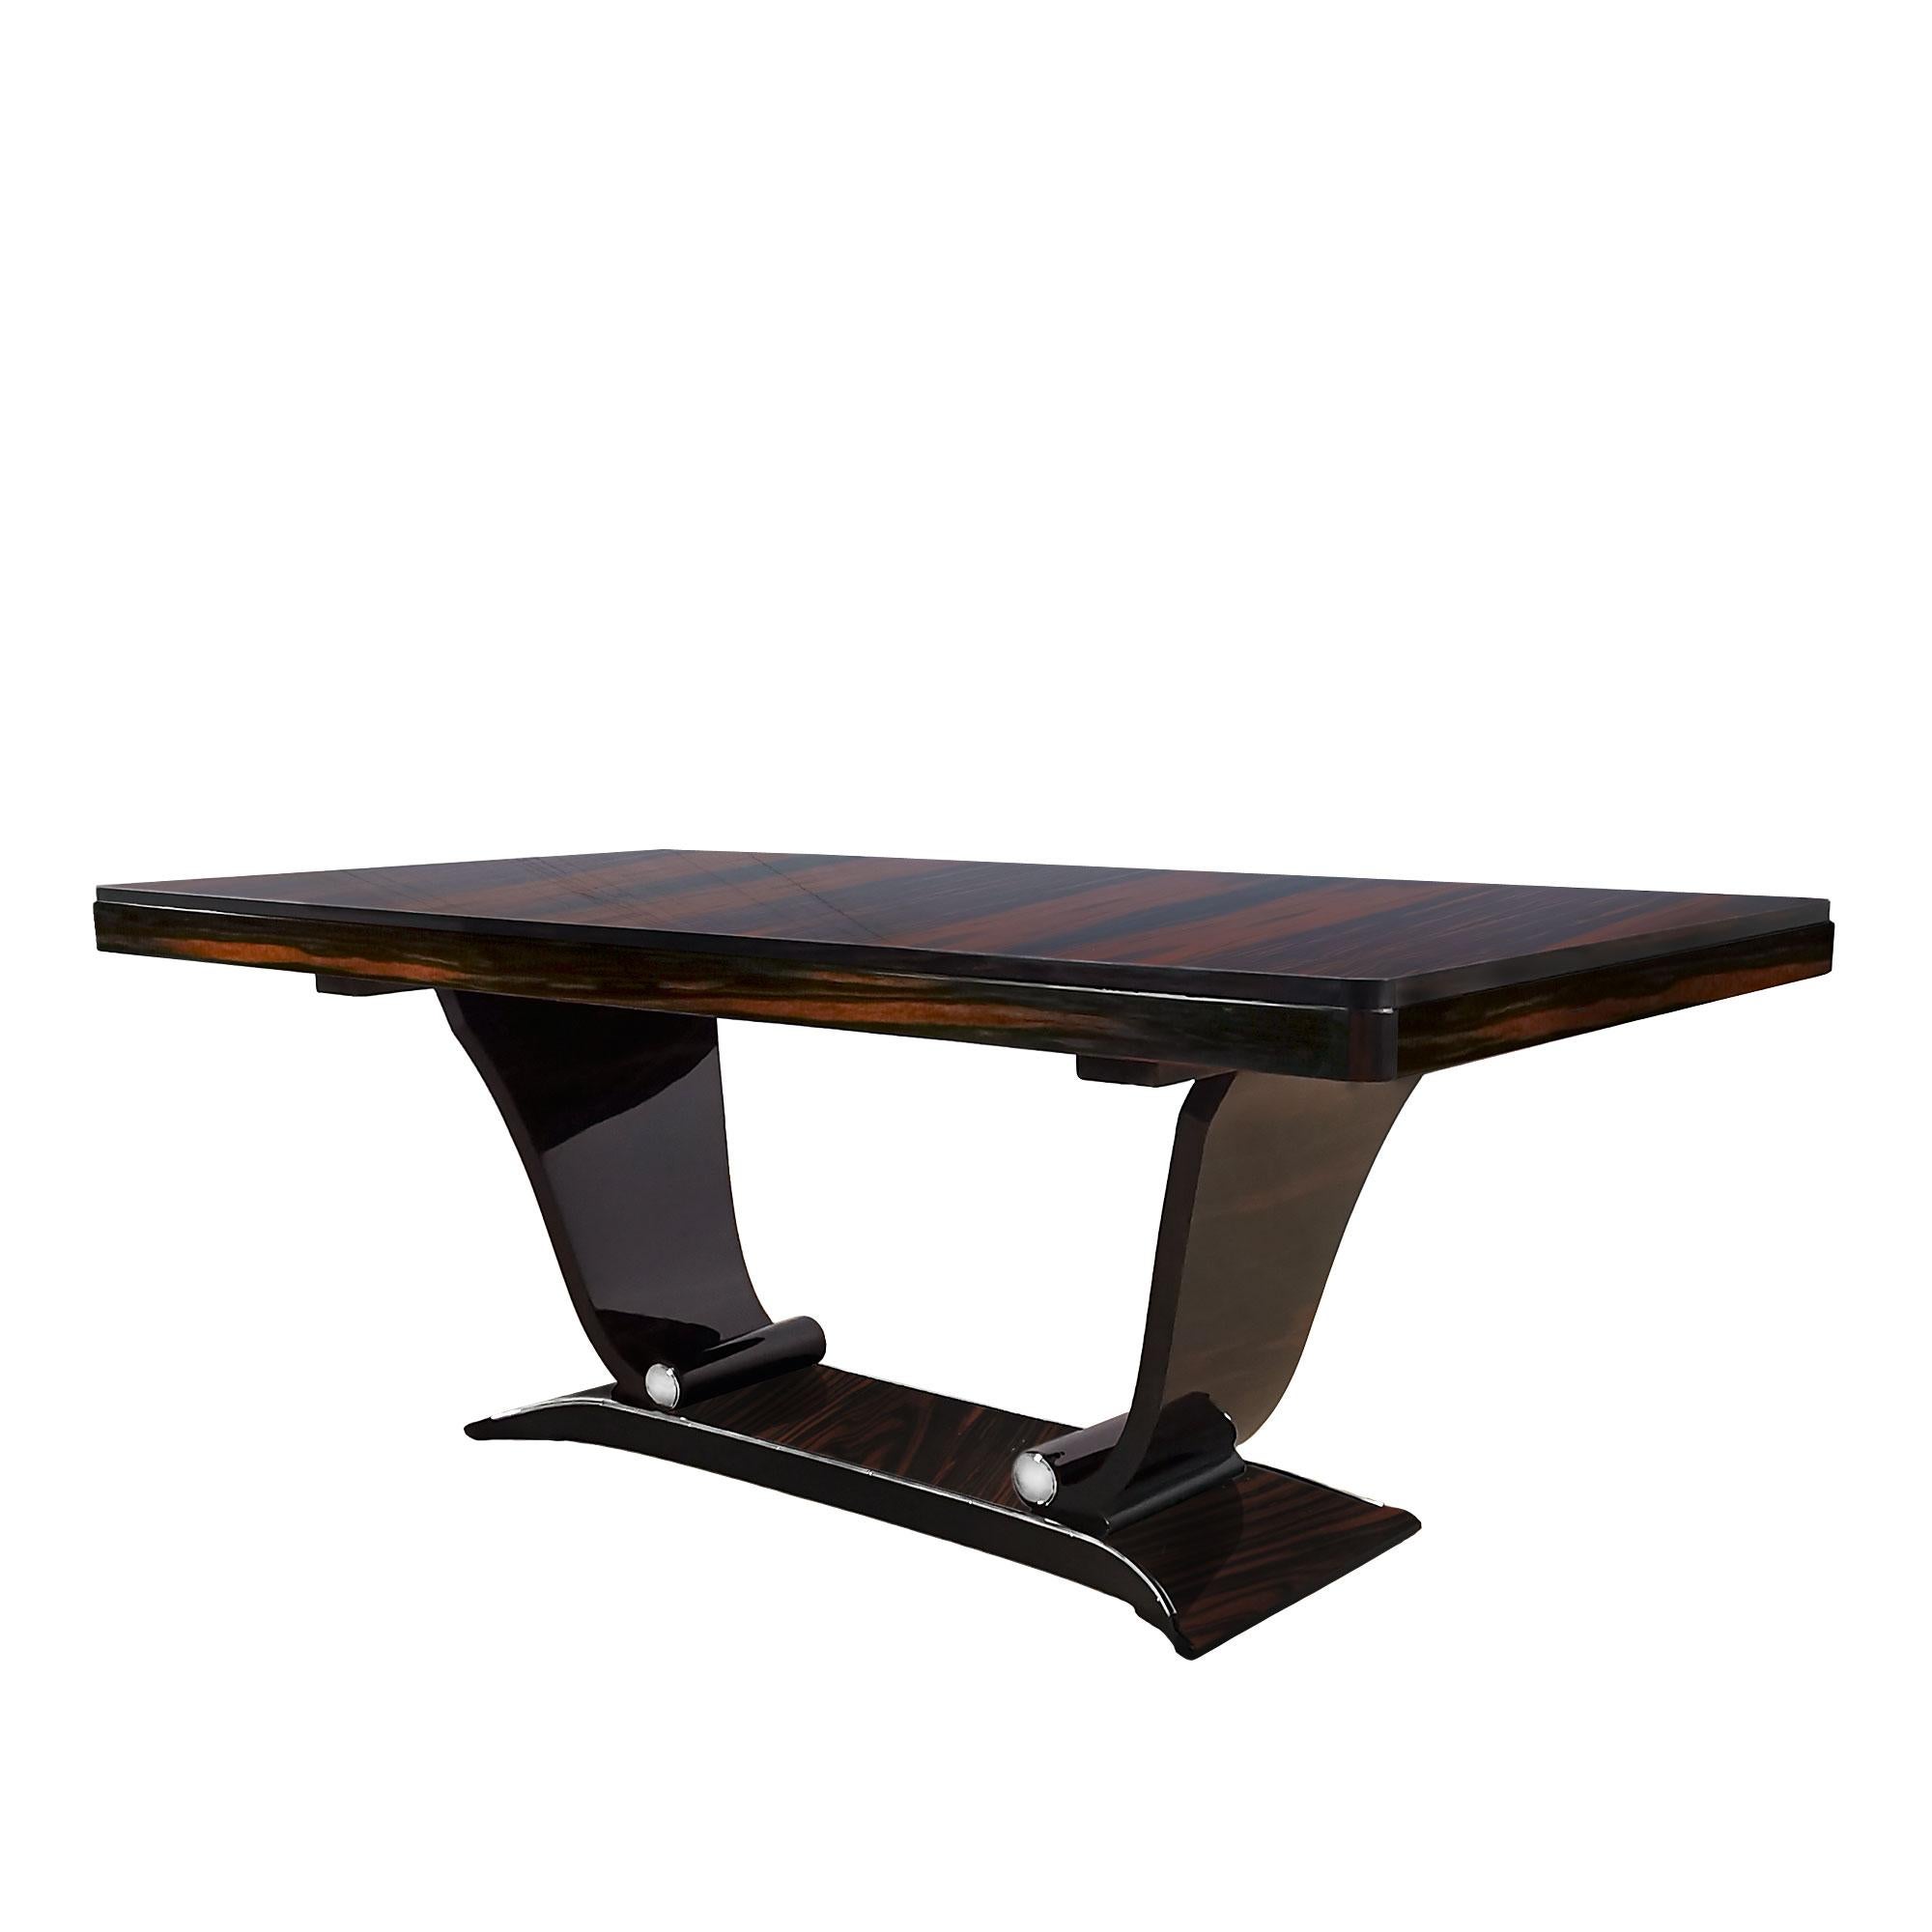 French 1930´s Art Deco Table, Paul Giordano, Macassar Ebony, Extensions Leaves, France